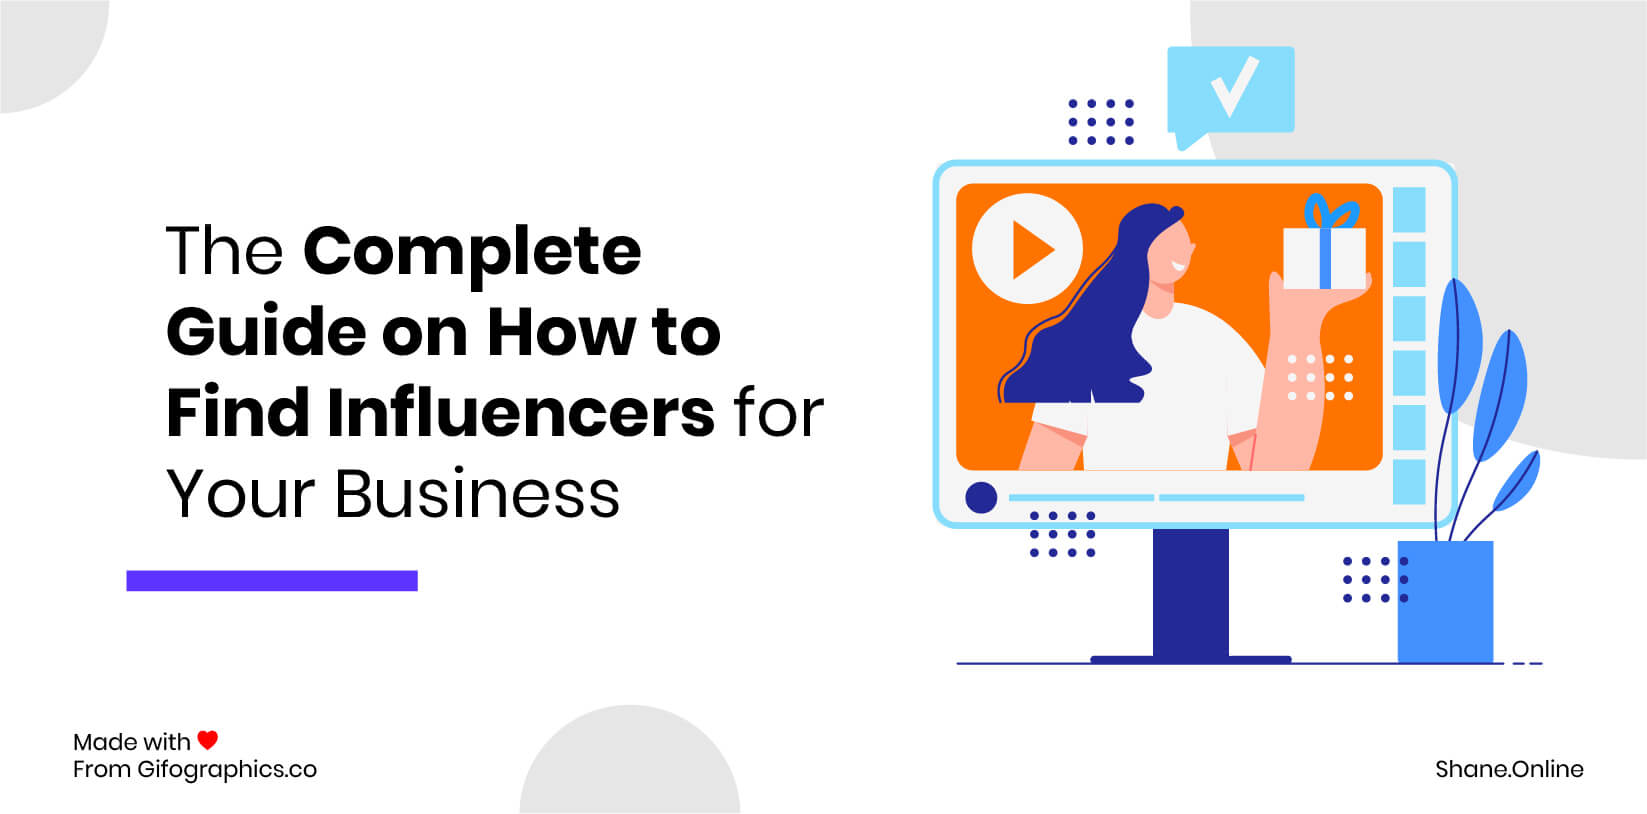 The Complete Guide on How to Find Influencers for Your Business